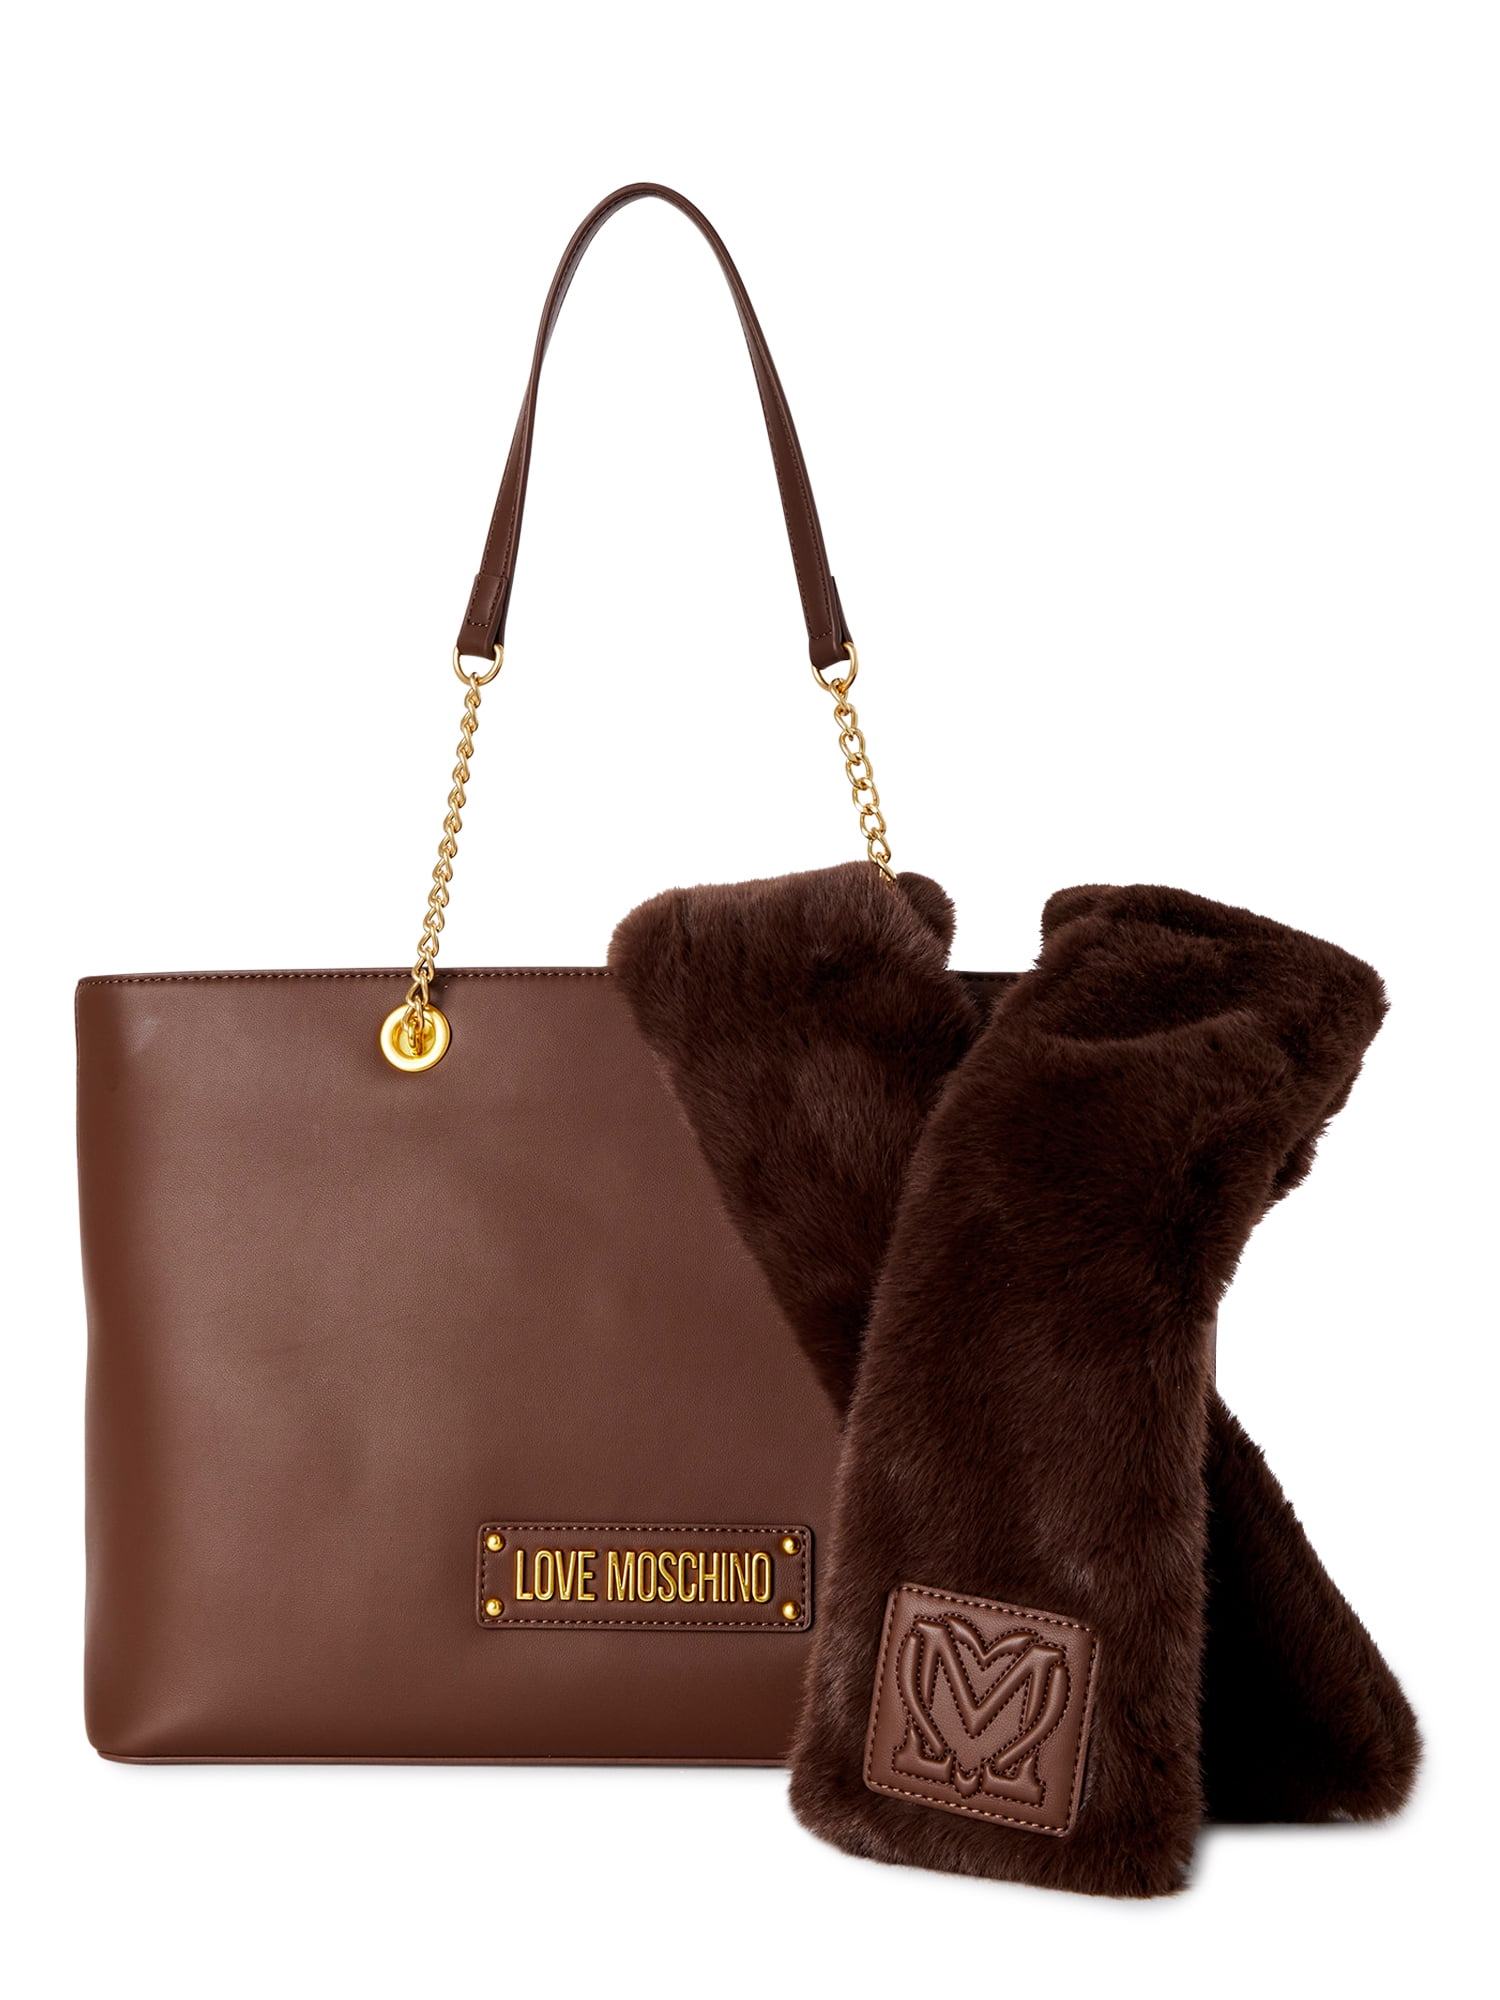 LOVE MOSCHINO Ancient Pink Tote Bag with Scarf for Her On Sale